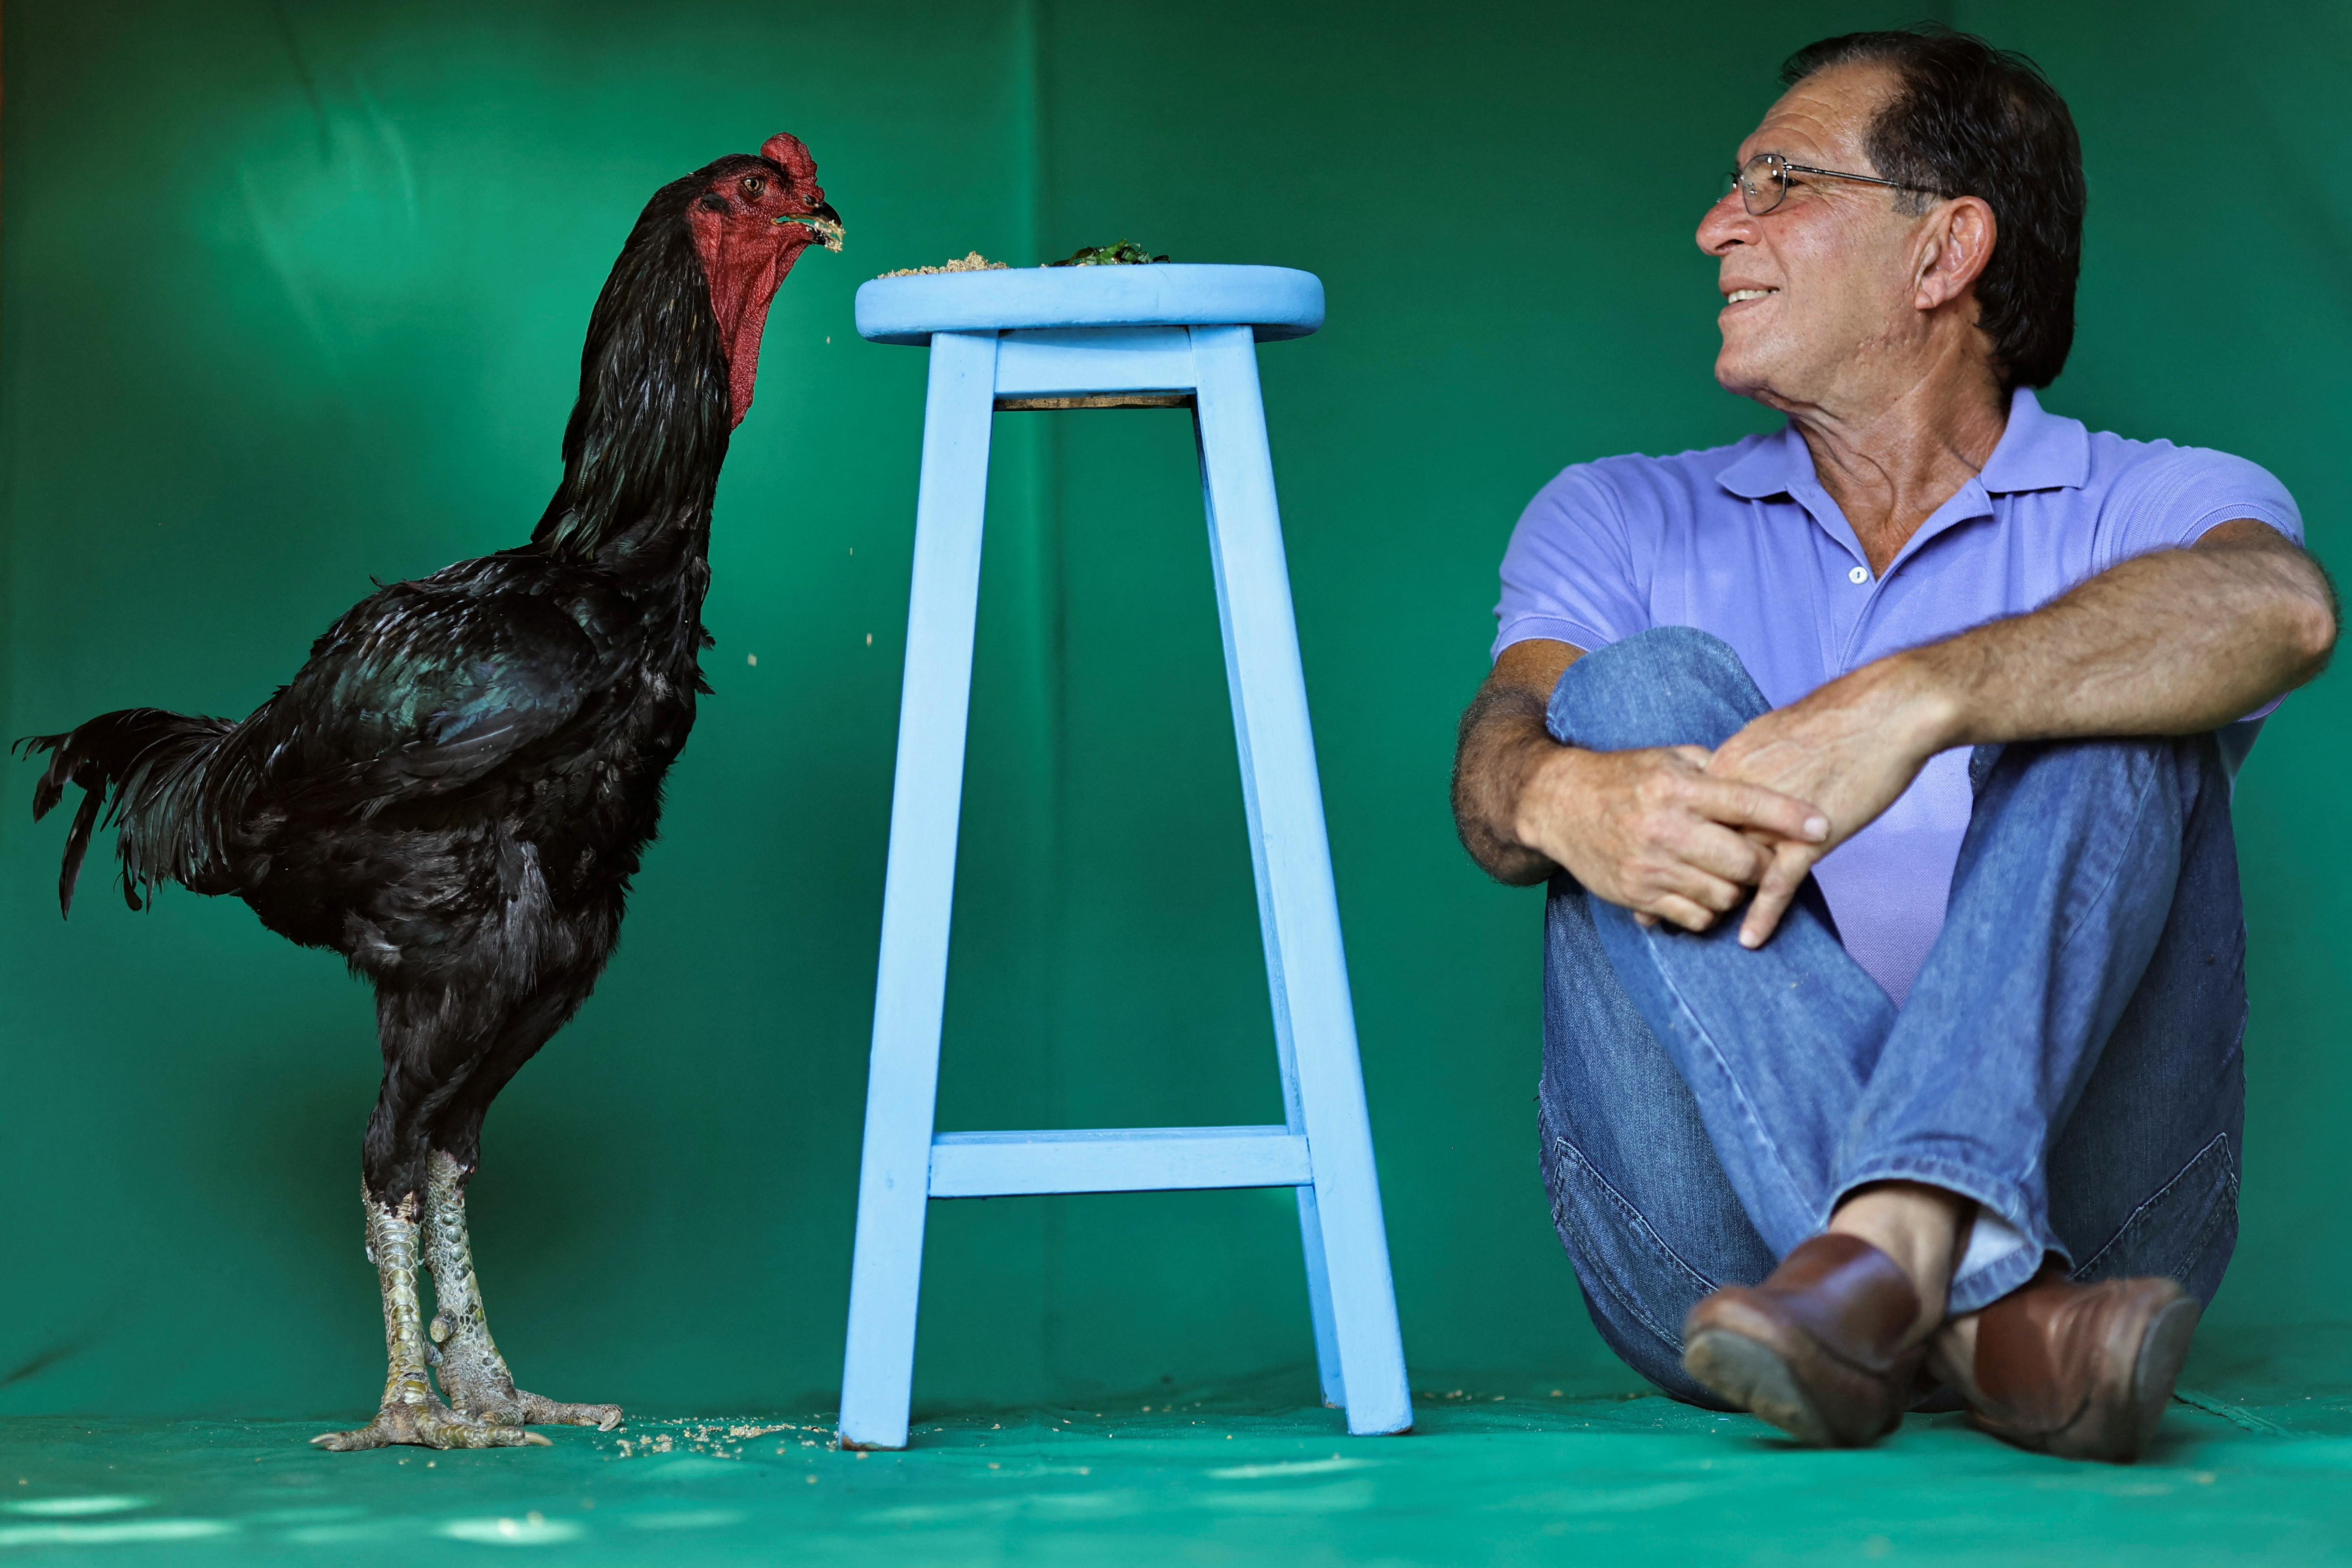 Brazilian farmer's giant rooster hobby hatches into profitable